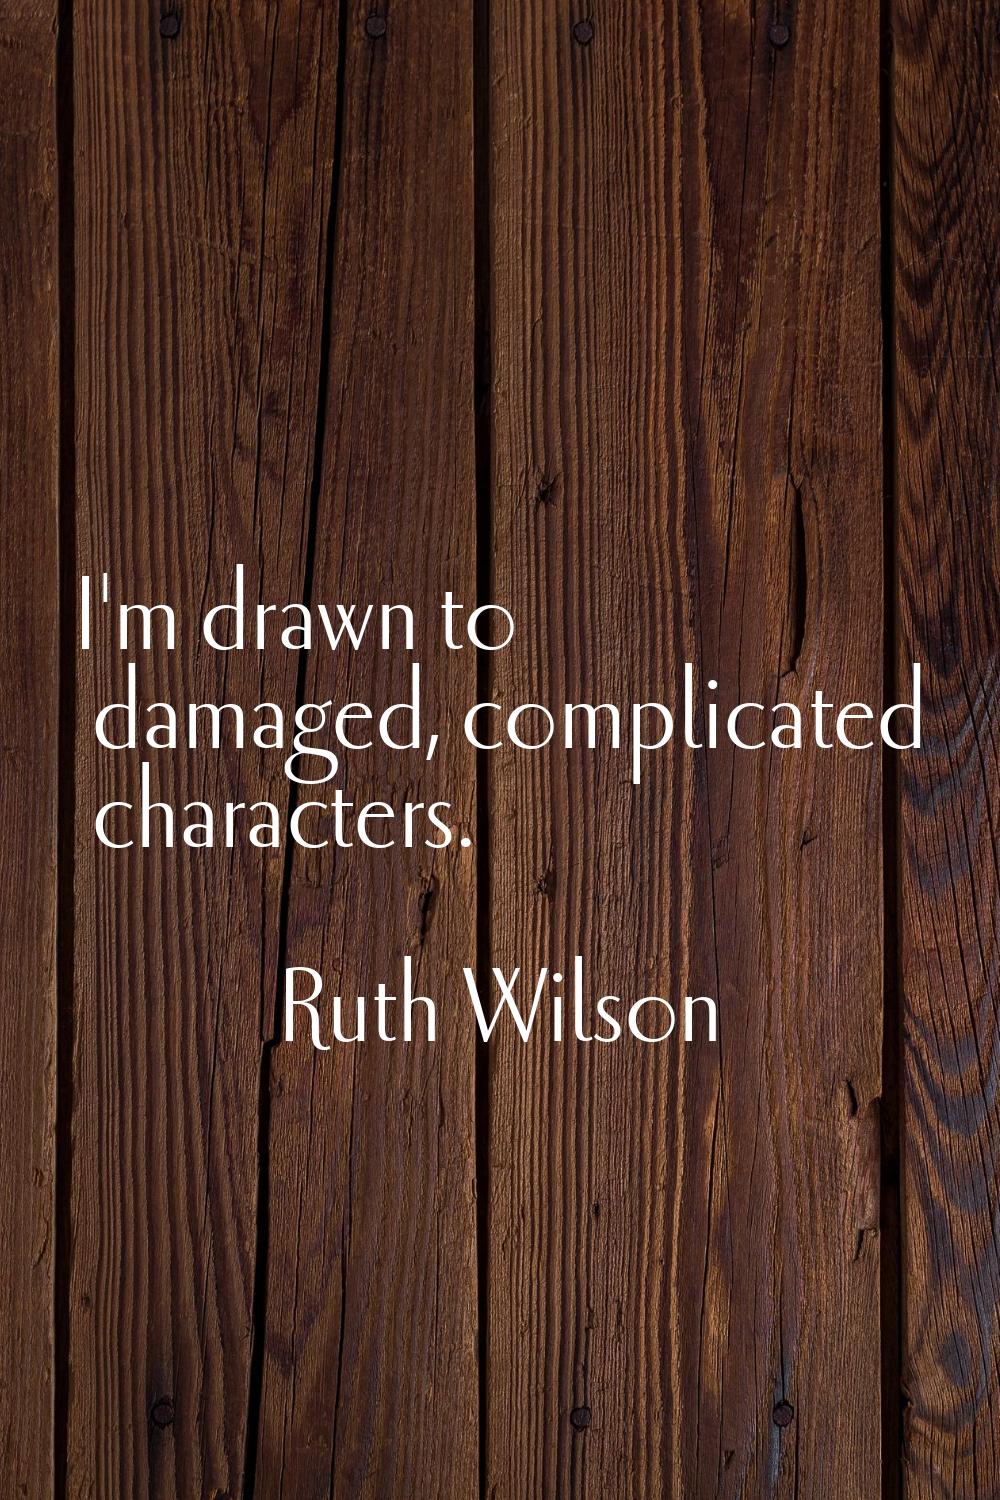 I'm drawn to damaged, complicated characters.